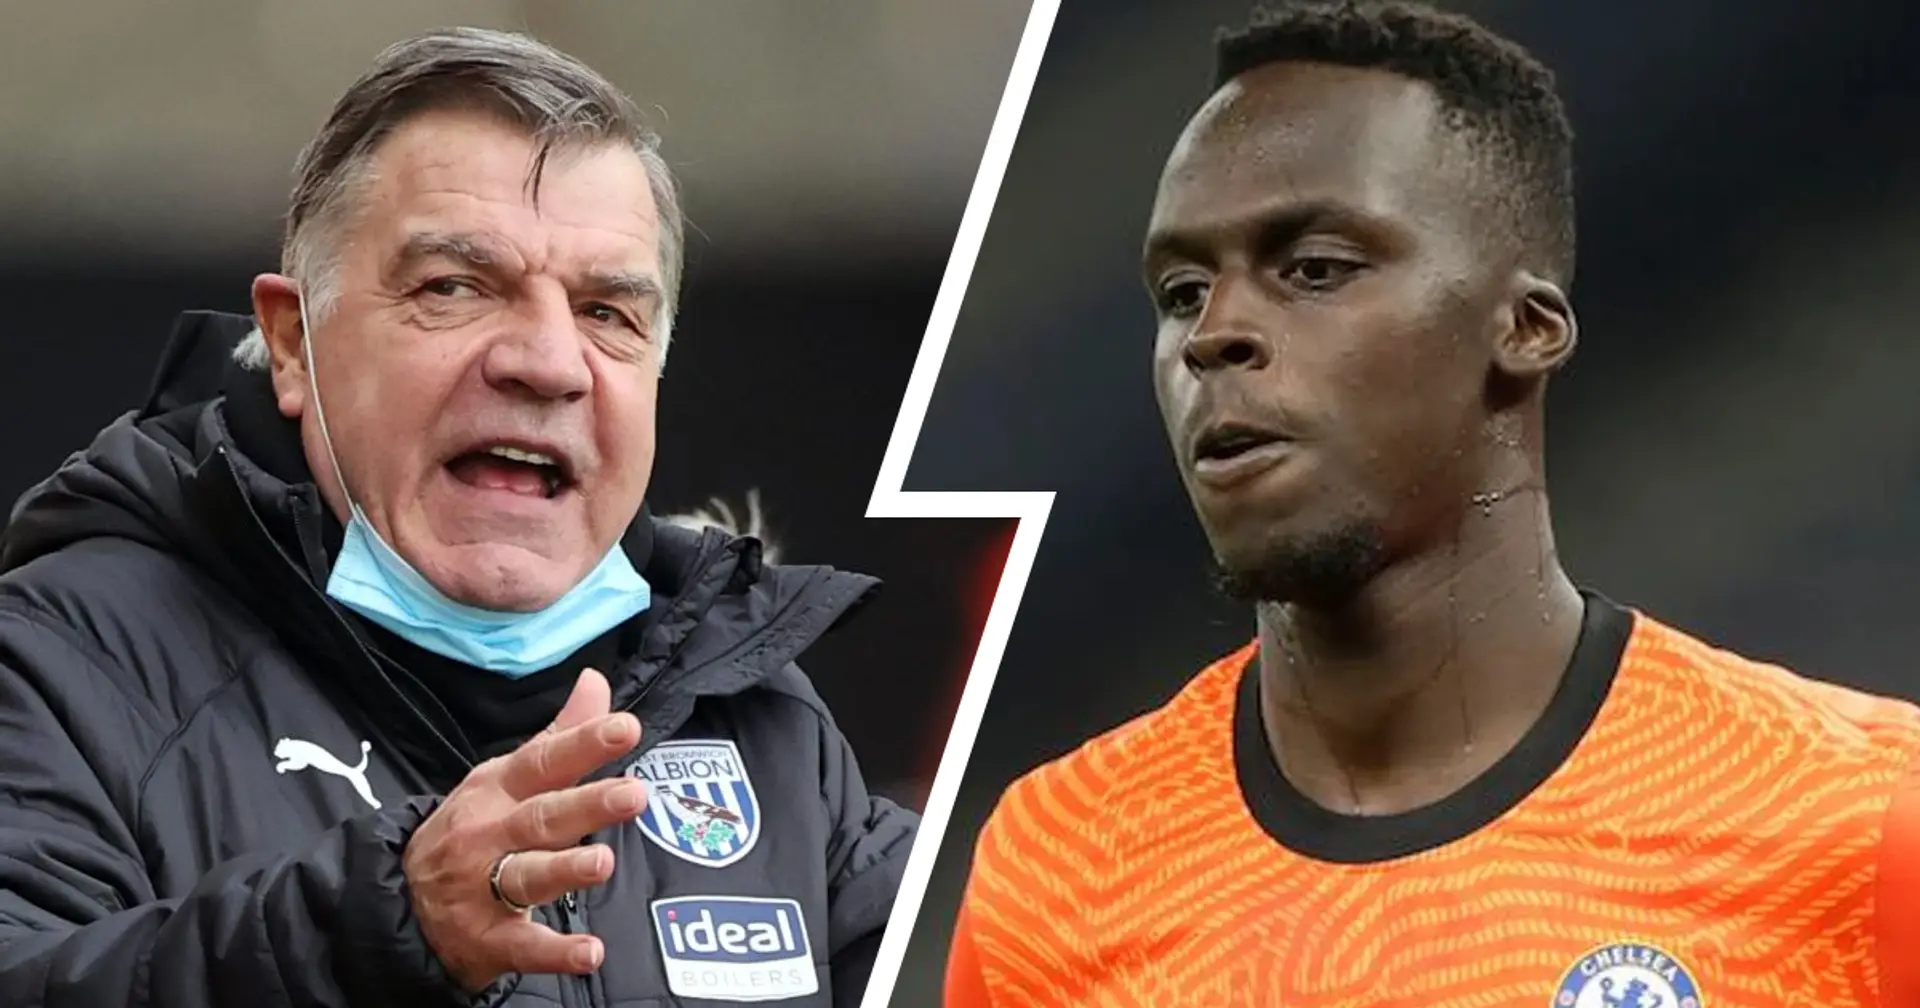 Sam Allardyce breaks down West Brom's tactics against Chelsea and how they exploited 'rash' Mendy